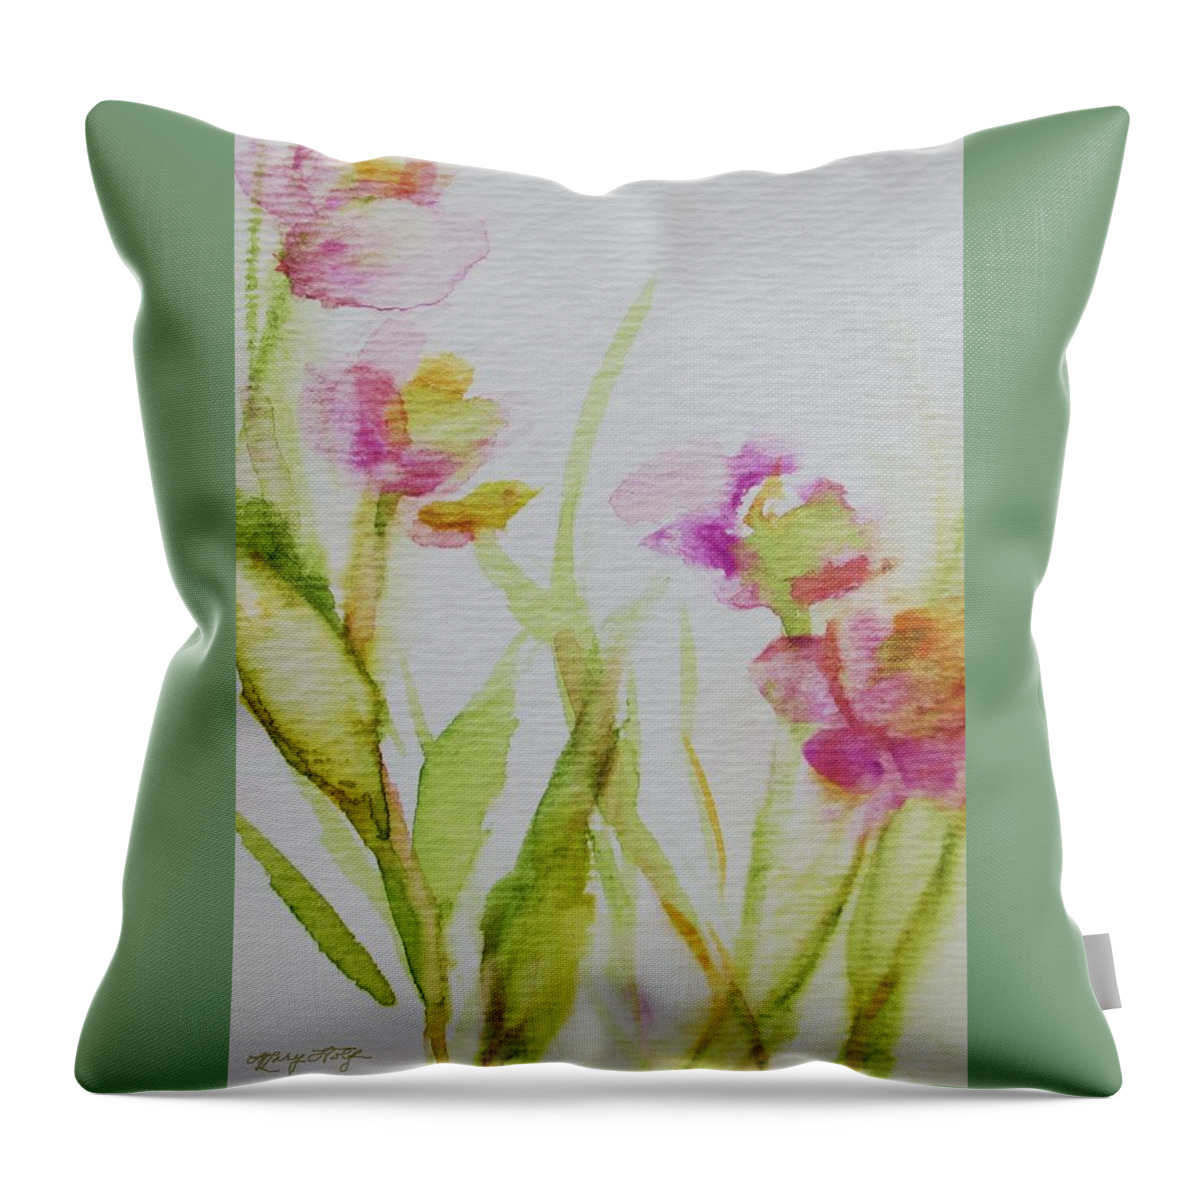 Floral Throw Pillow featuring the painting Delicate Blossoms by Mary Wolf